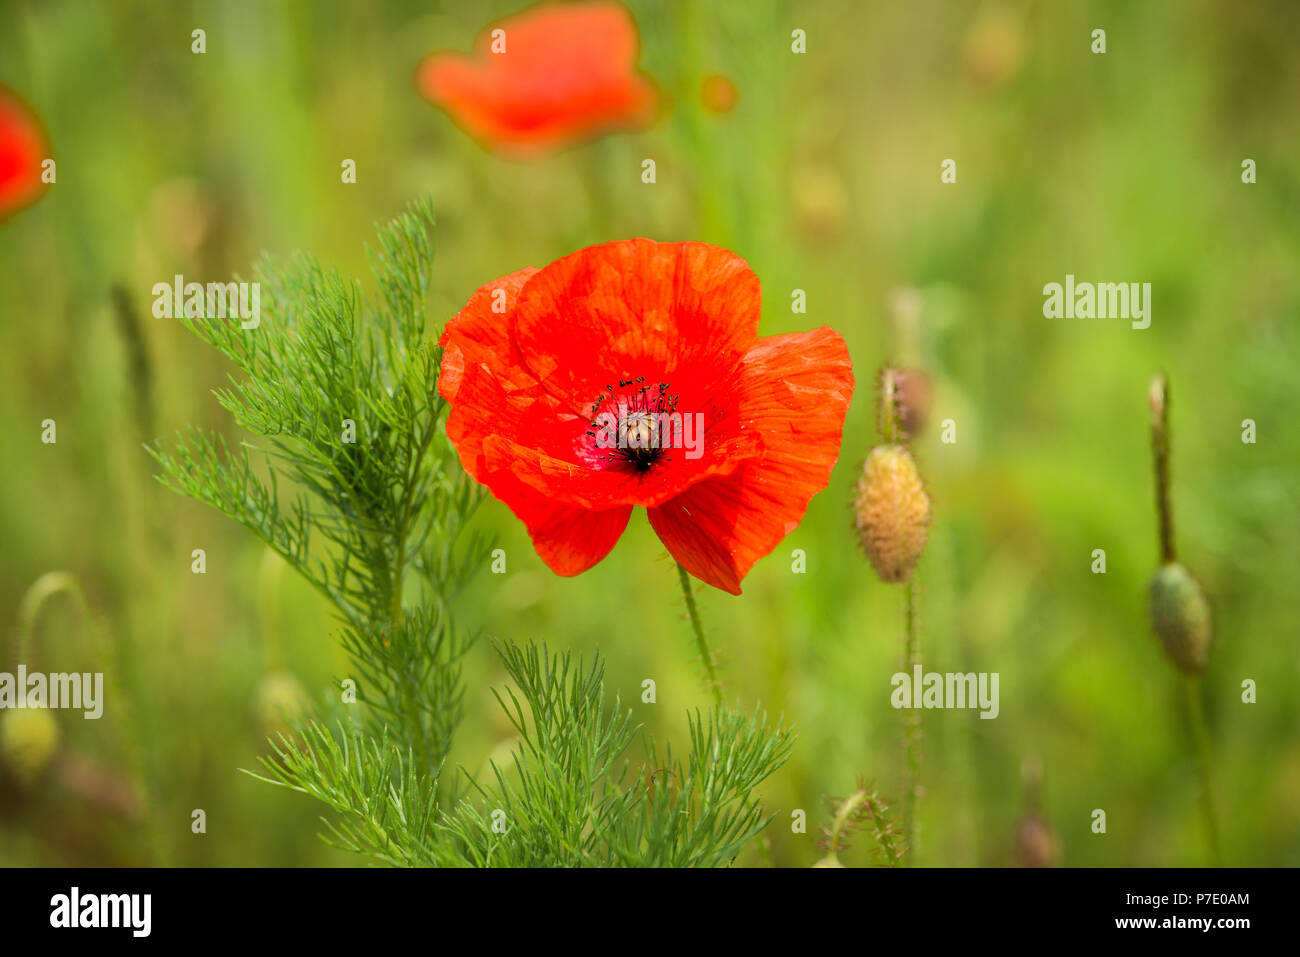 Poppies blooming in a field Stock Photo